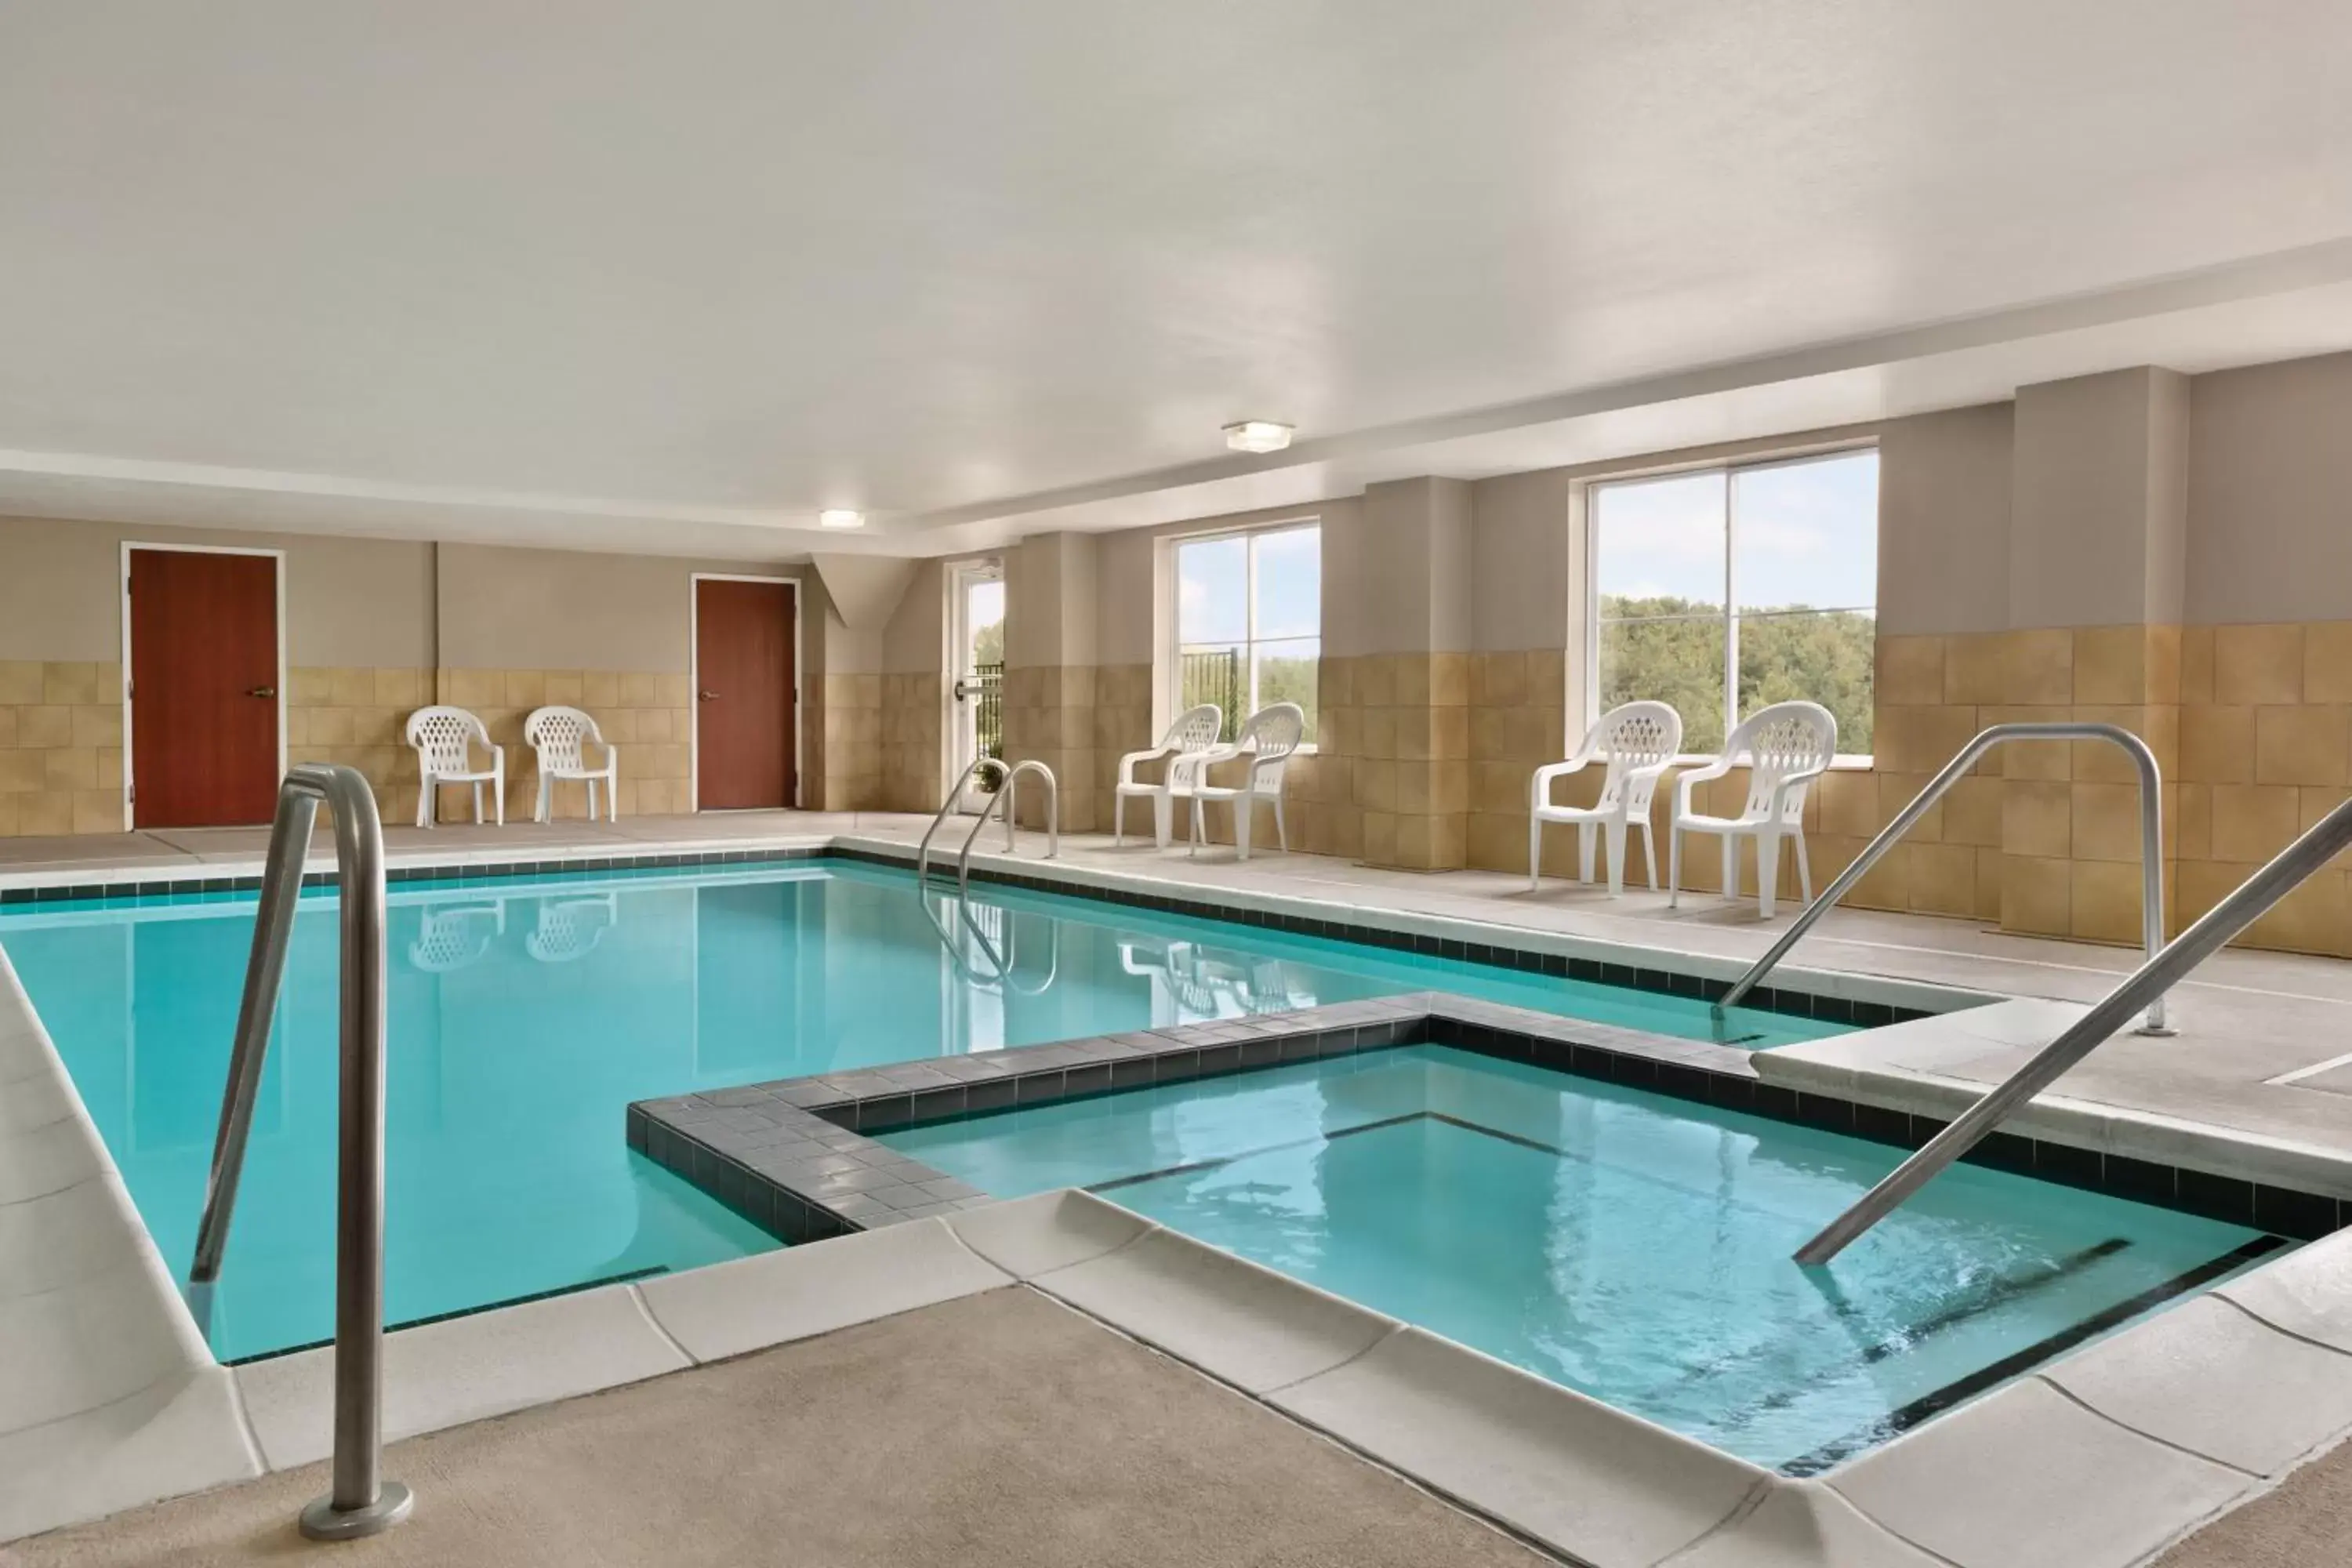 Swimming Pool in Country Inn & Suites by Radisson, Wytheville, VA